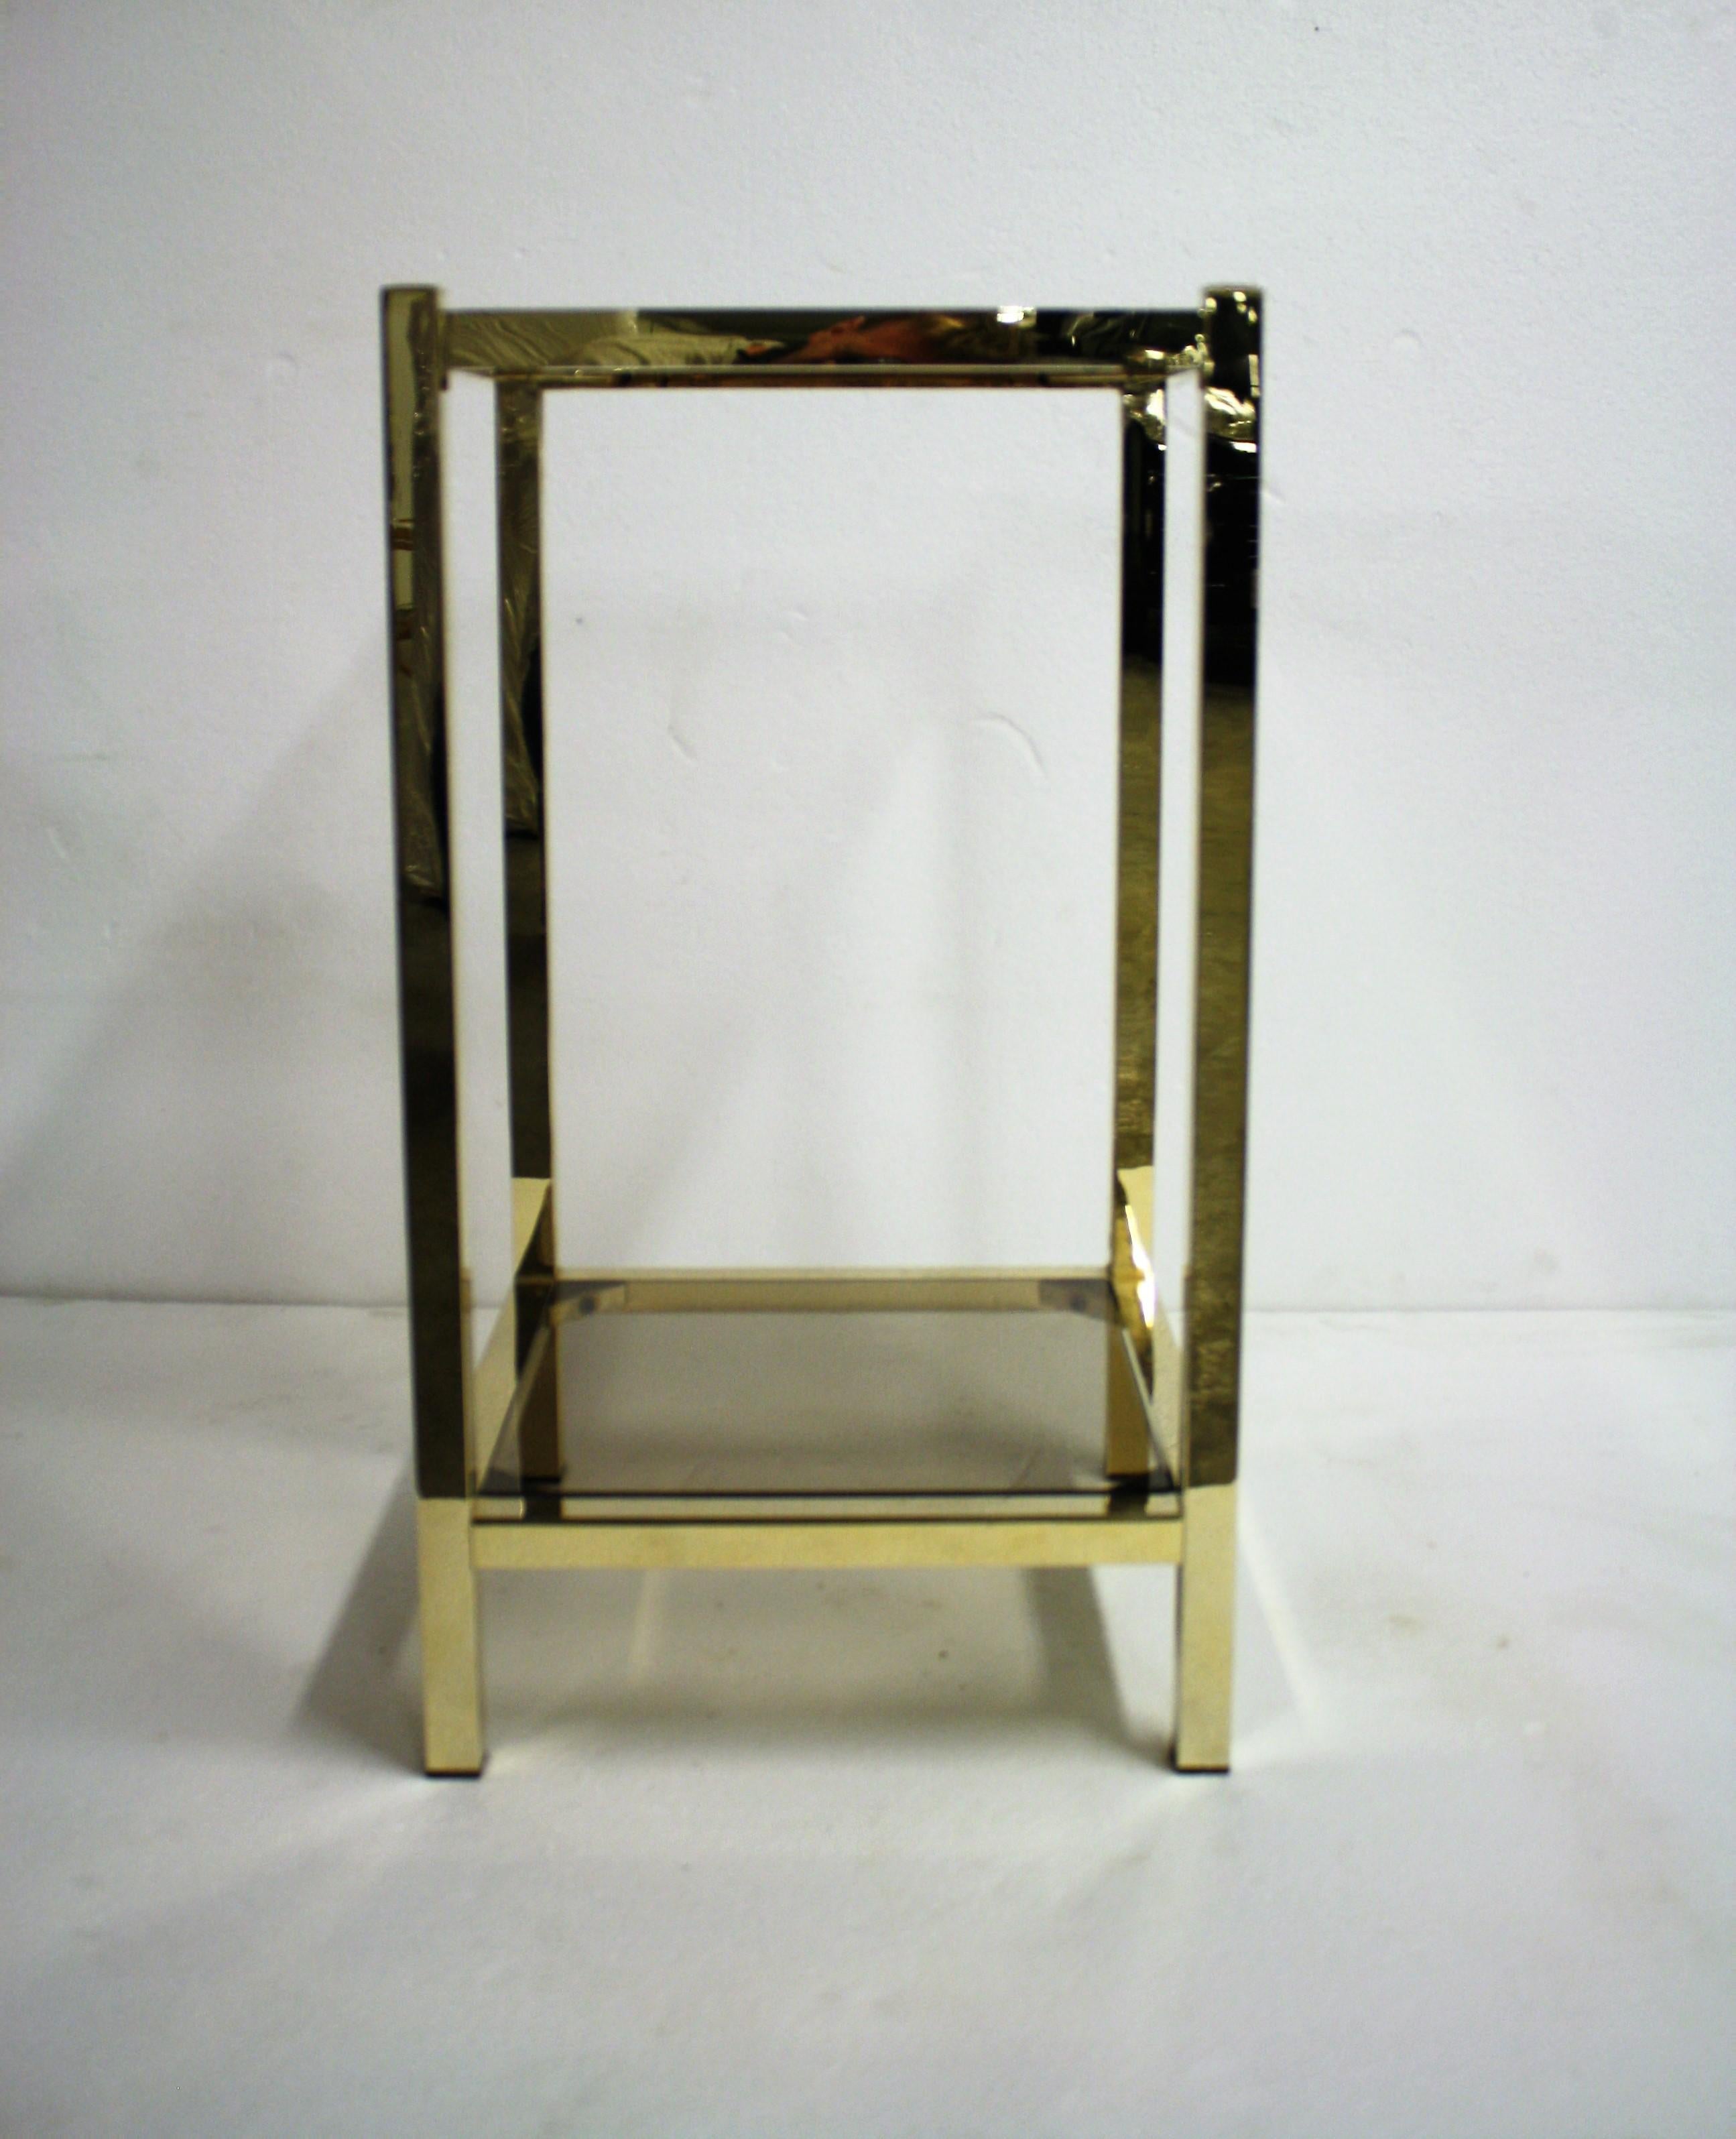 Midcentury brass two-tier display table with smoked glass.

The tables has been polished back to it's original shiny golden color.

Good condition, original undamaged glass.

Ideal to use as a display table or side table.

1970s,